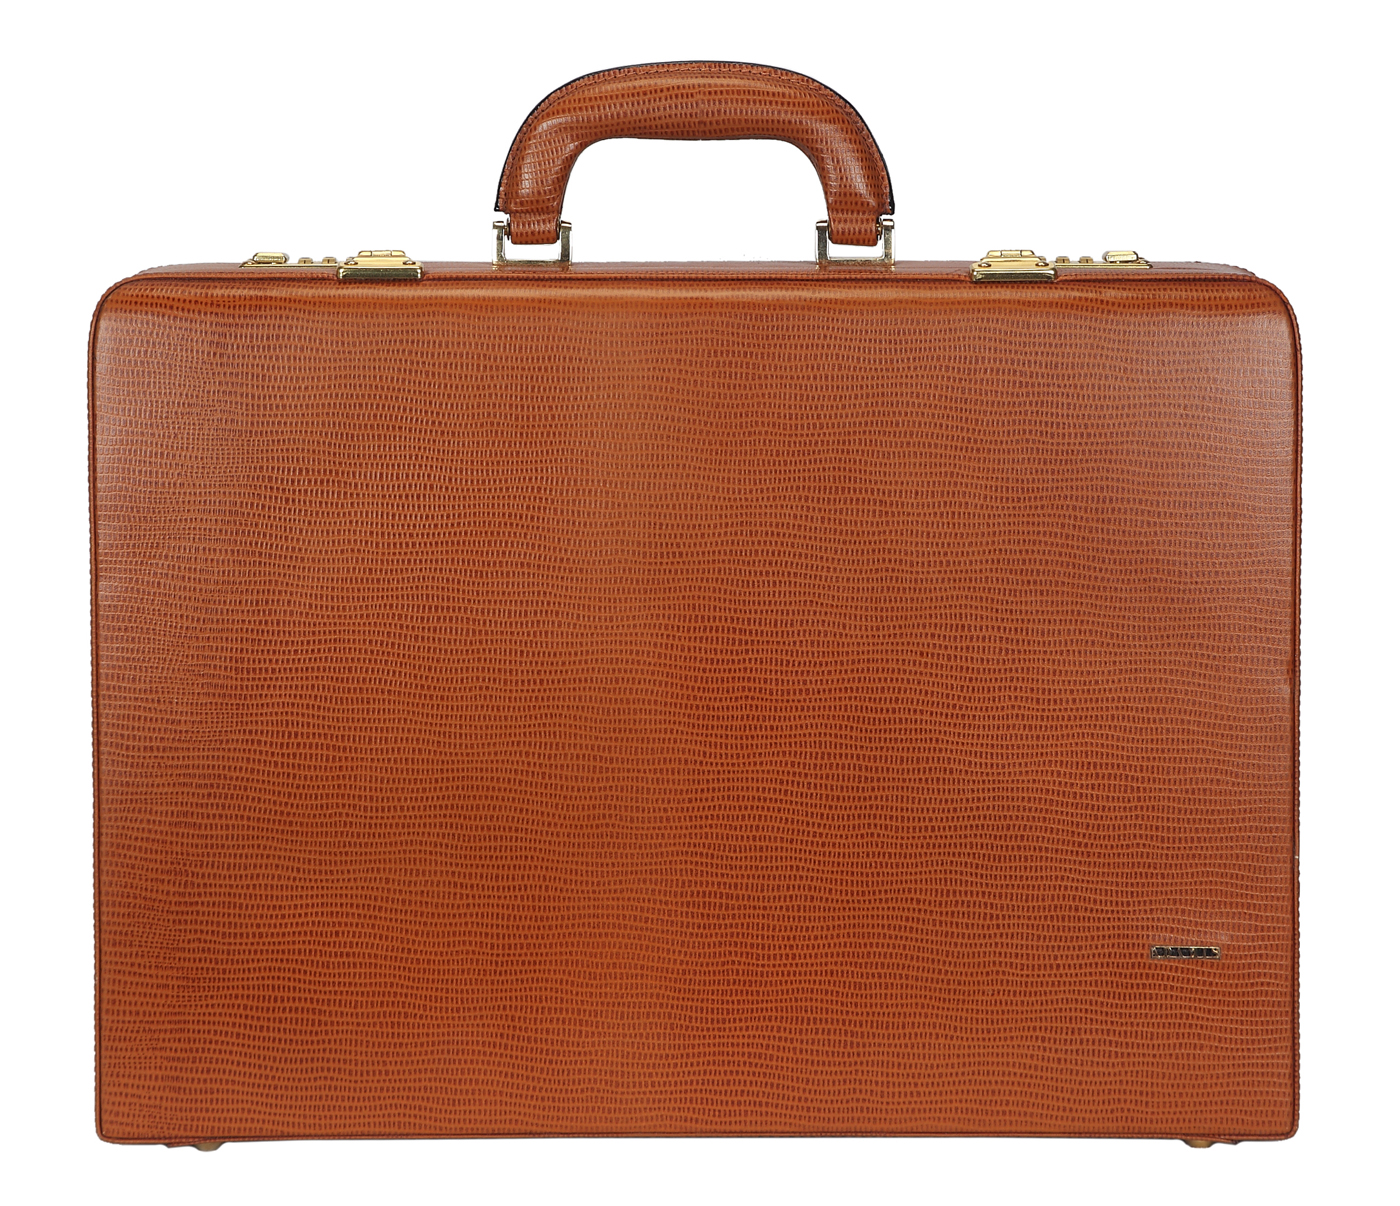 BC13--Briefcase hard top in Genuine Leather - Tan